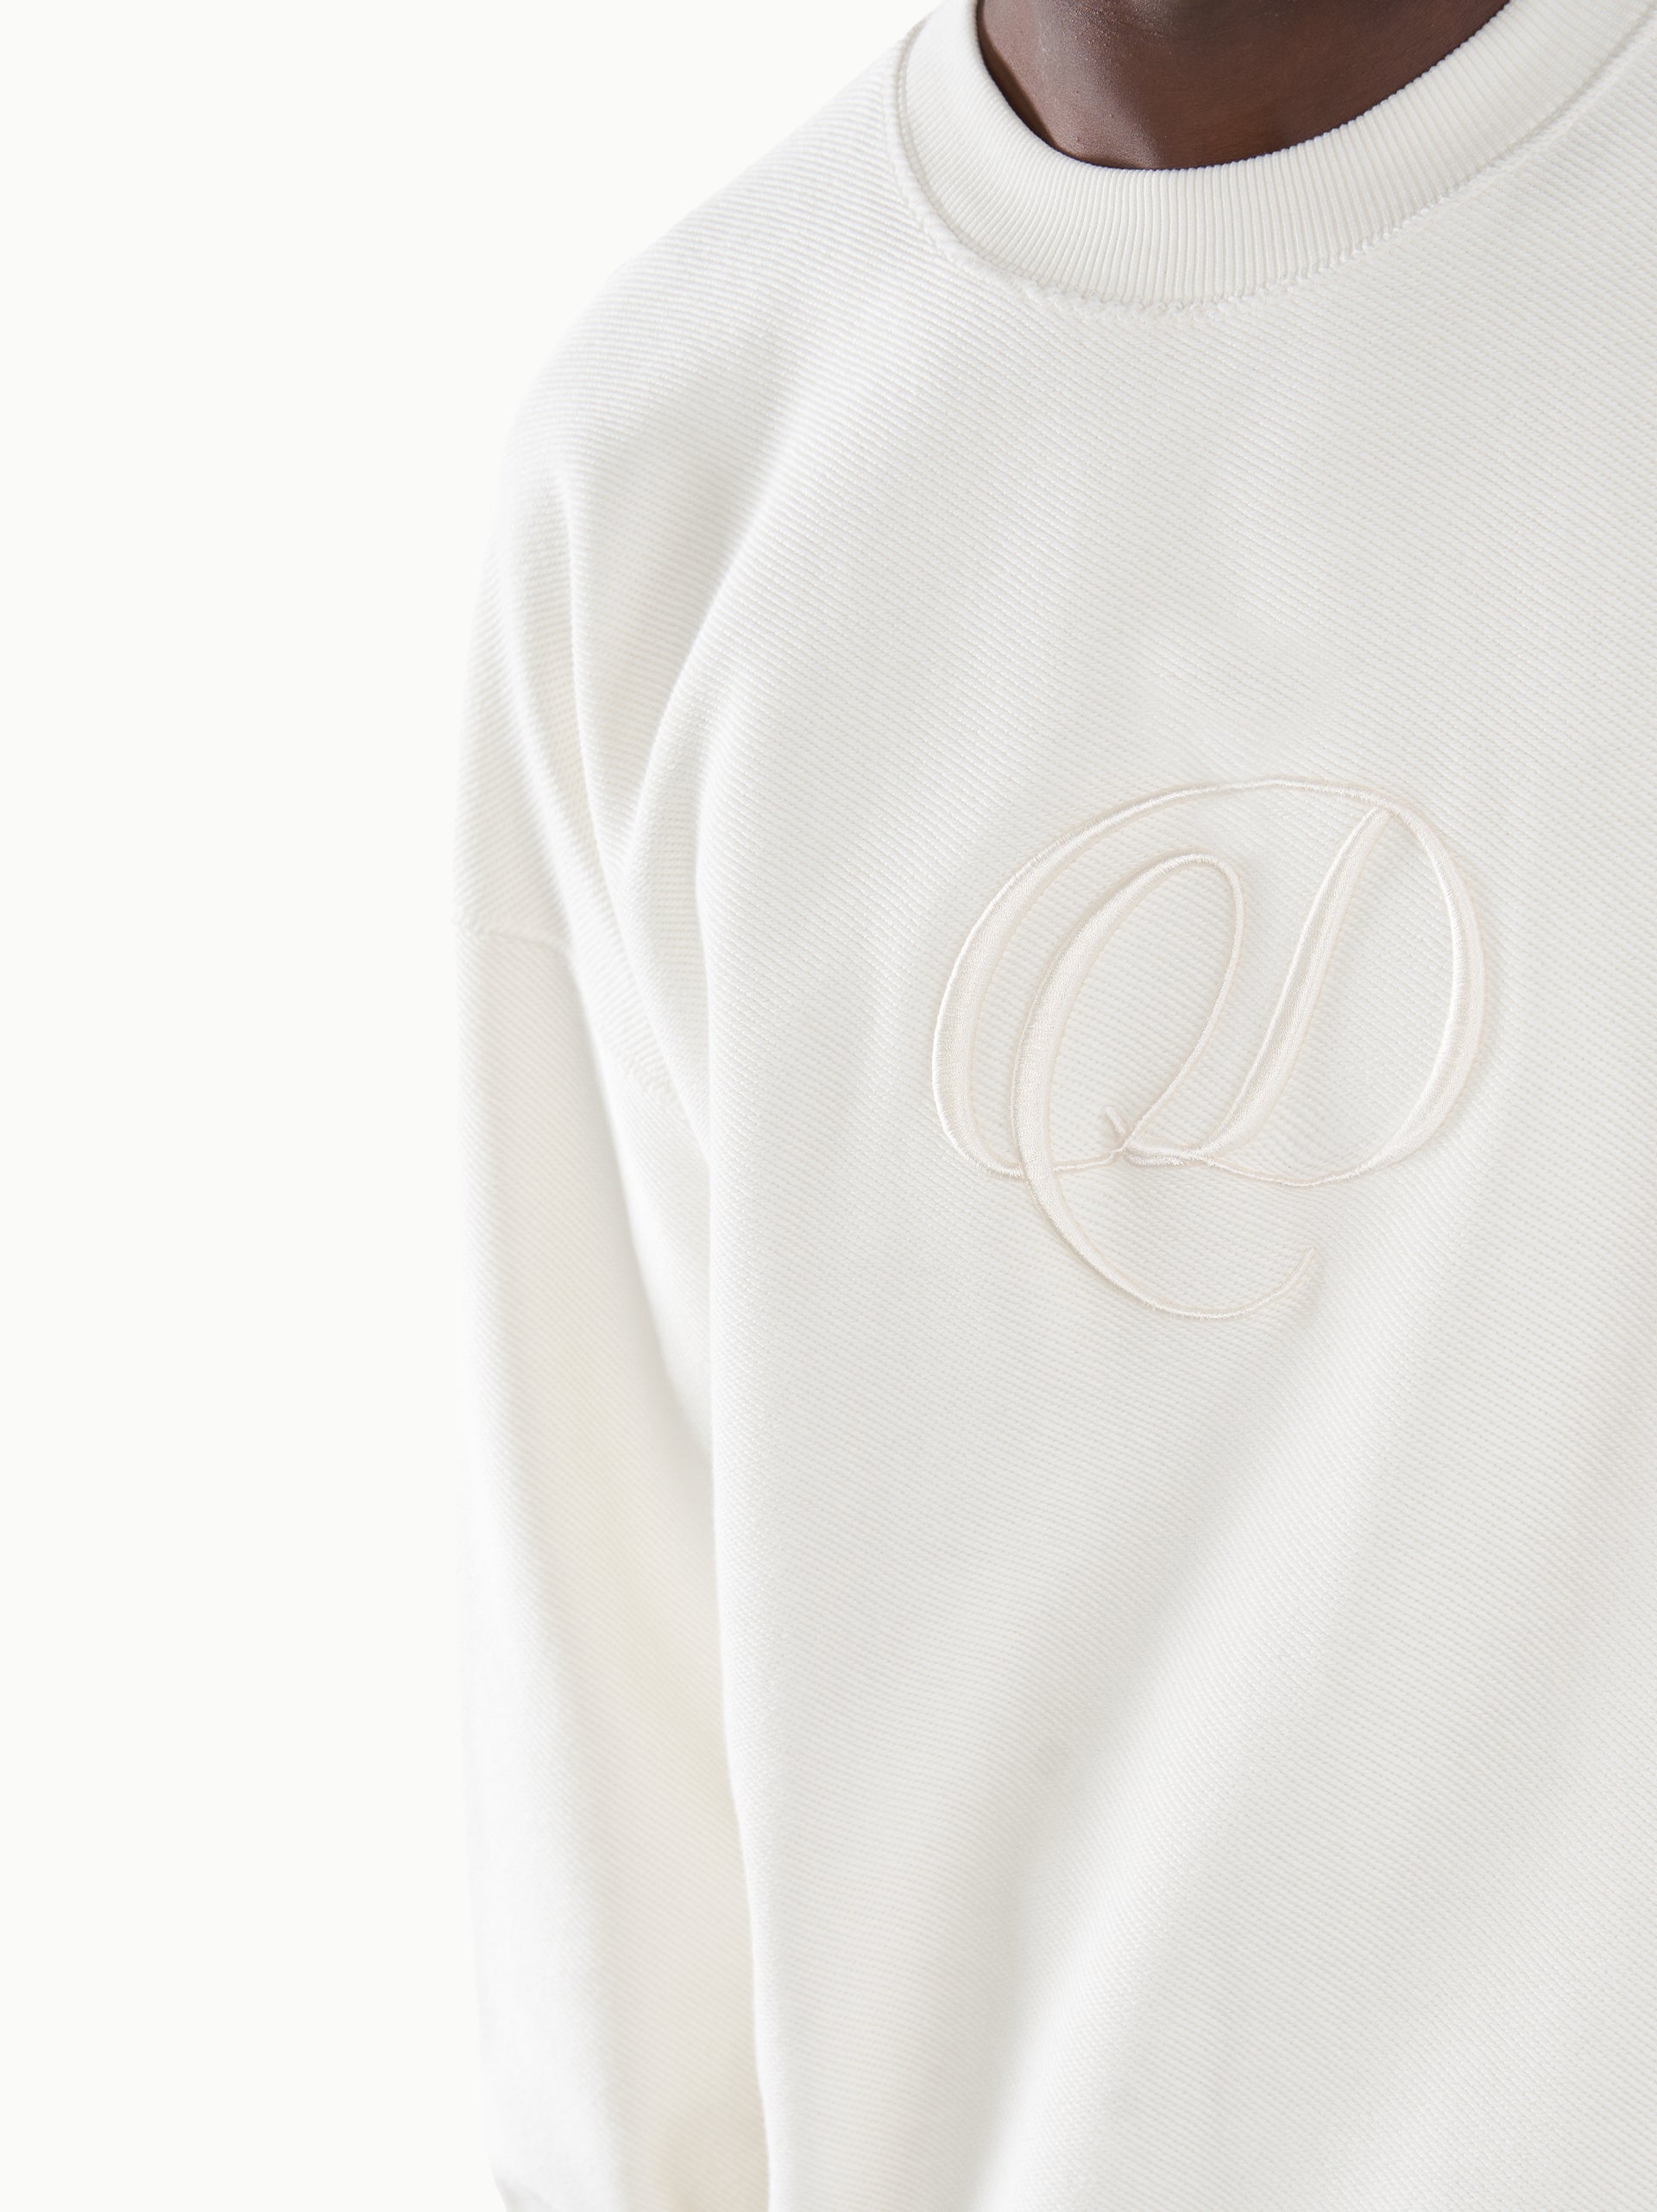 Inside Out Sweater - Off White - DENNIS DANIEL™